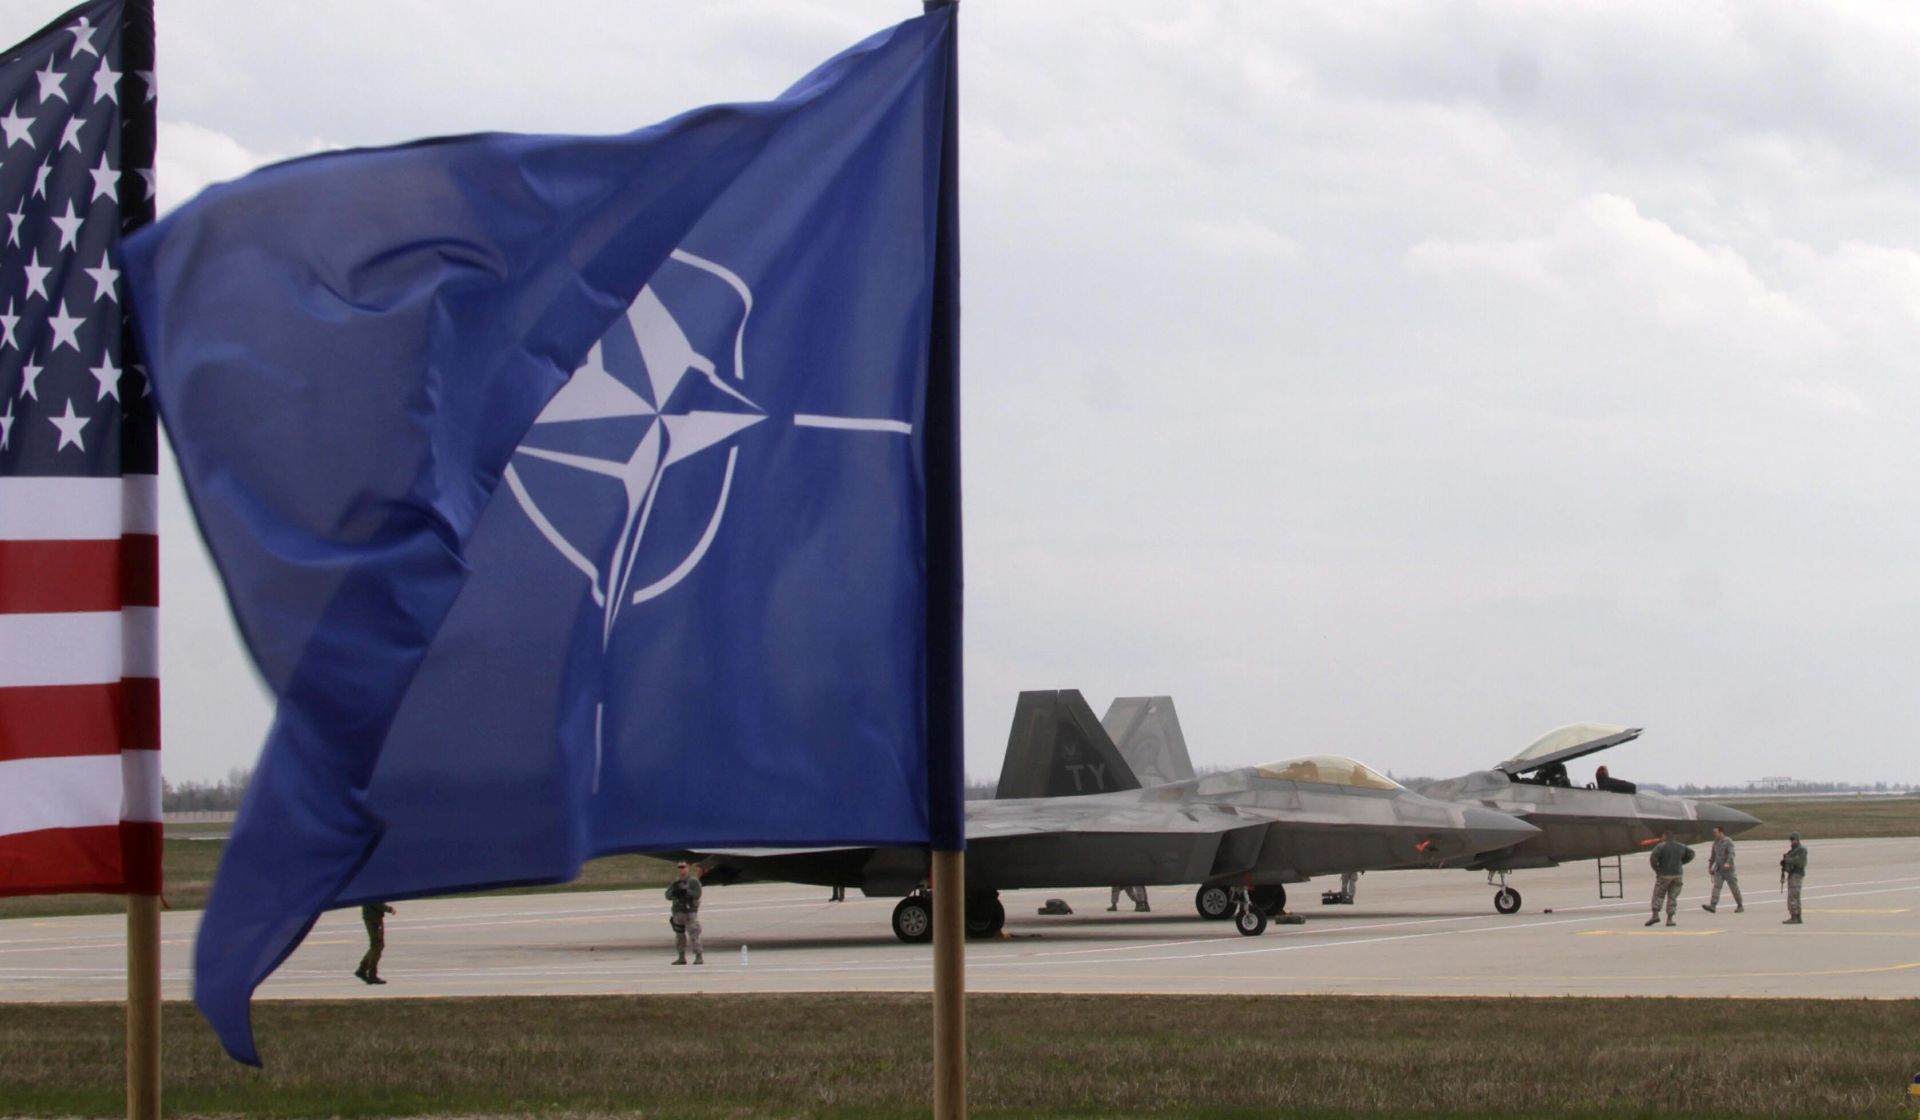 epa05280288 The flags of the USA and NATO fly in front of fifth-generation F-22 Raptor jets at Siauliai Air Base, Lithuania, 27 April 2016. Two US Air Force F-22 Raptors fighter jets arrived at Siauliai Air Base Air Base as support for regional security. The Lockheed Martin F-22 Raptor is a stealth fifth-generation tactical military jet developed for the United States Air Force (USAF), claimed to be the most advanced fighter in service.  EPA/VALDA KALNINA